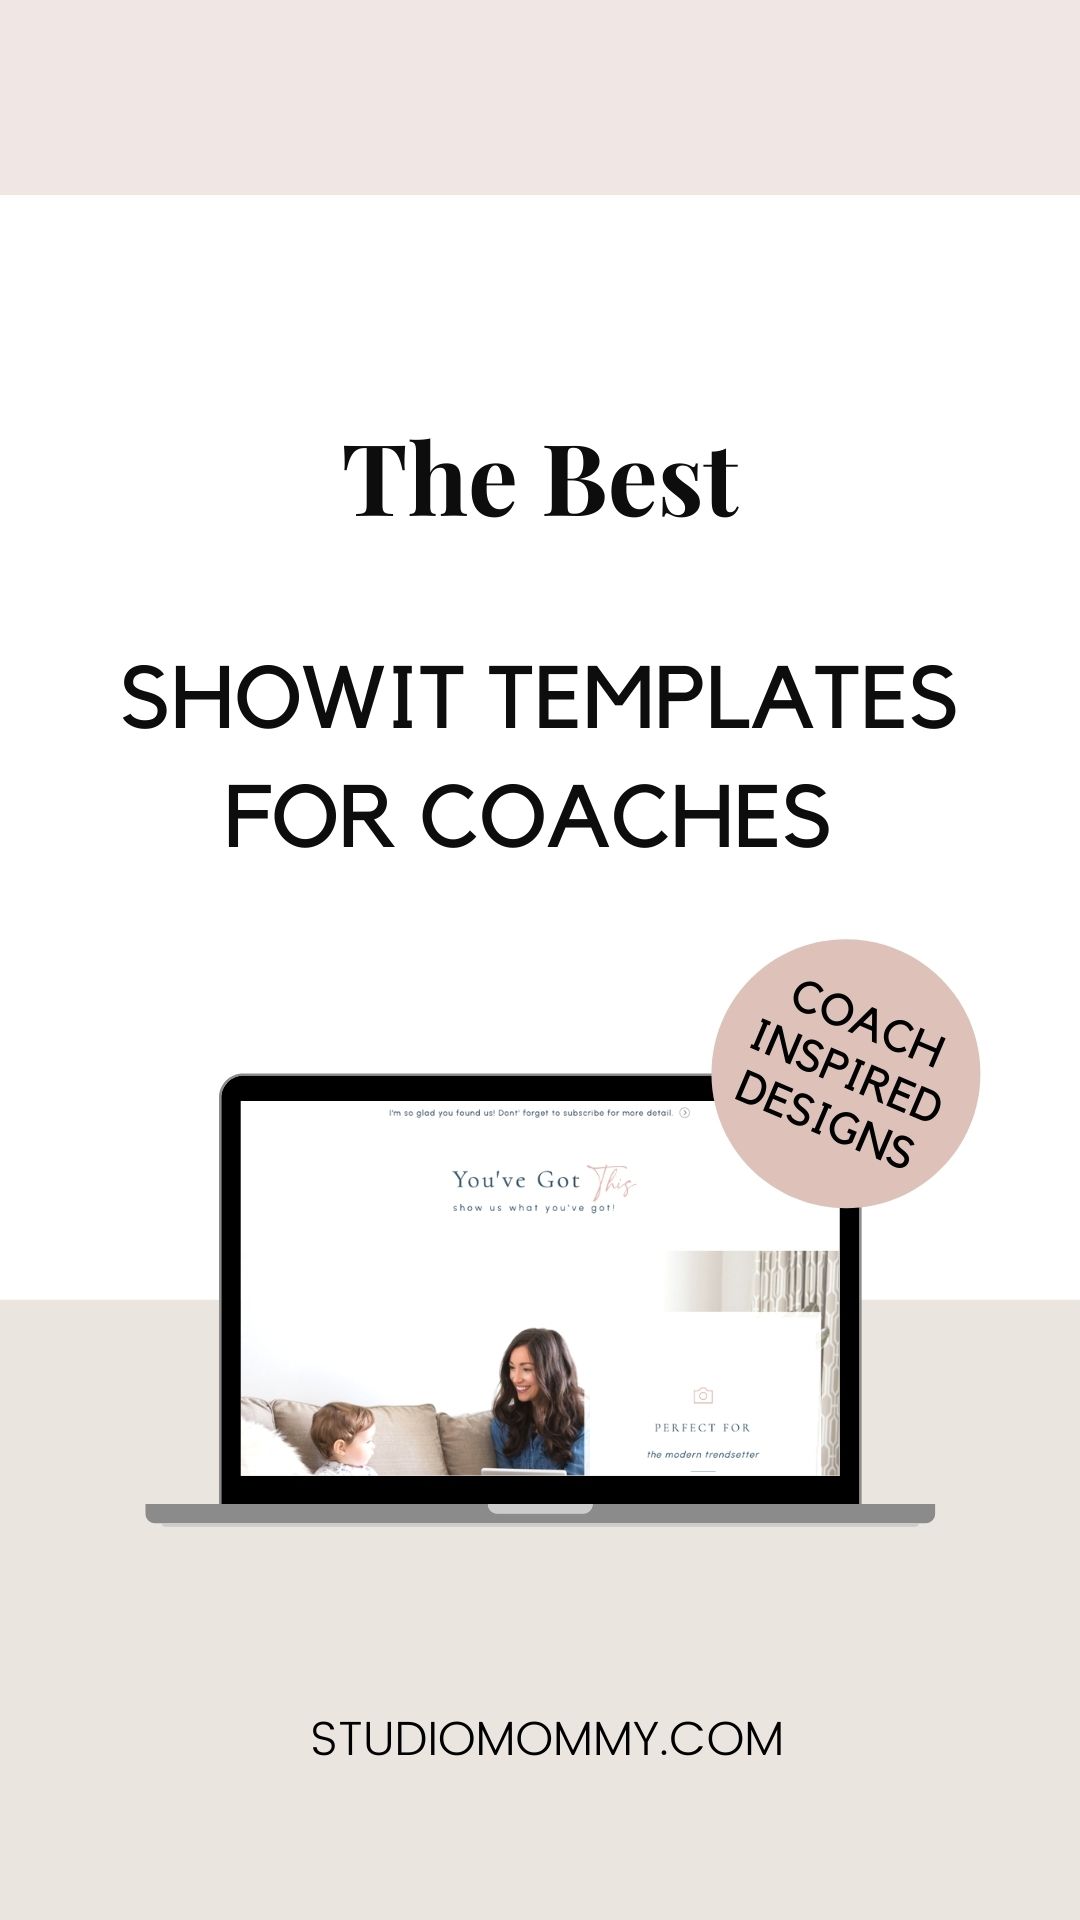 According to Medium.com, business coaching is one of the fastest-growing services in the United States. With the increase of coaches in the online space, a functional website design is a must to experience business growth. Let's look at the best Showit templates for coaches and how they will help you fight for your place in the online space. #studiomommy